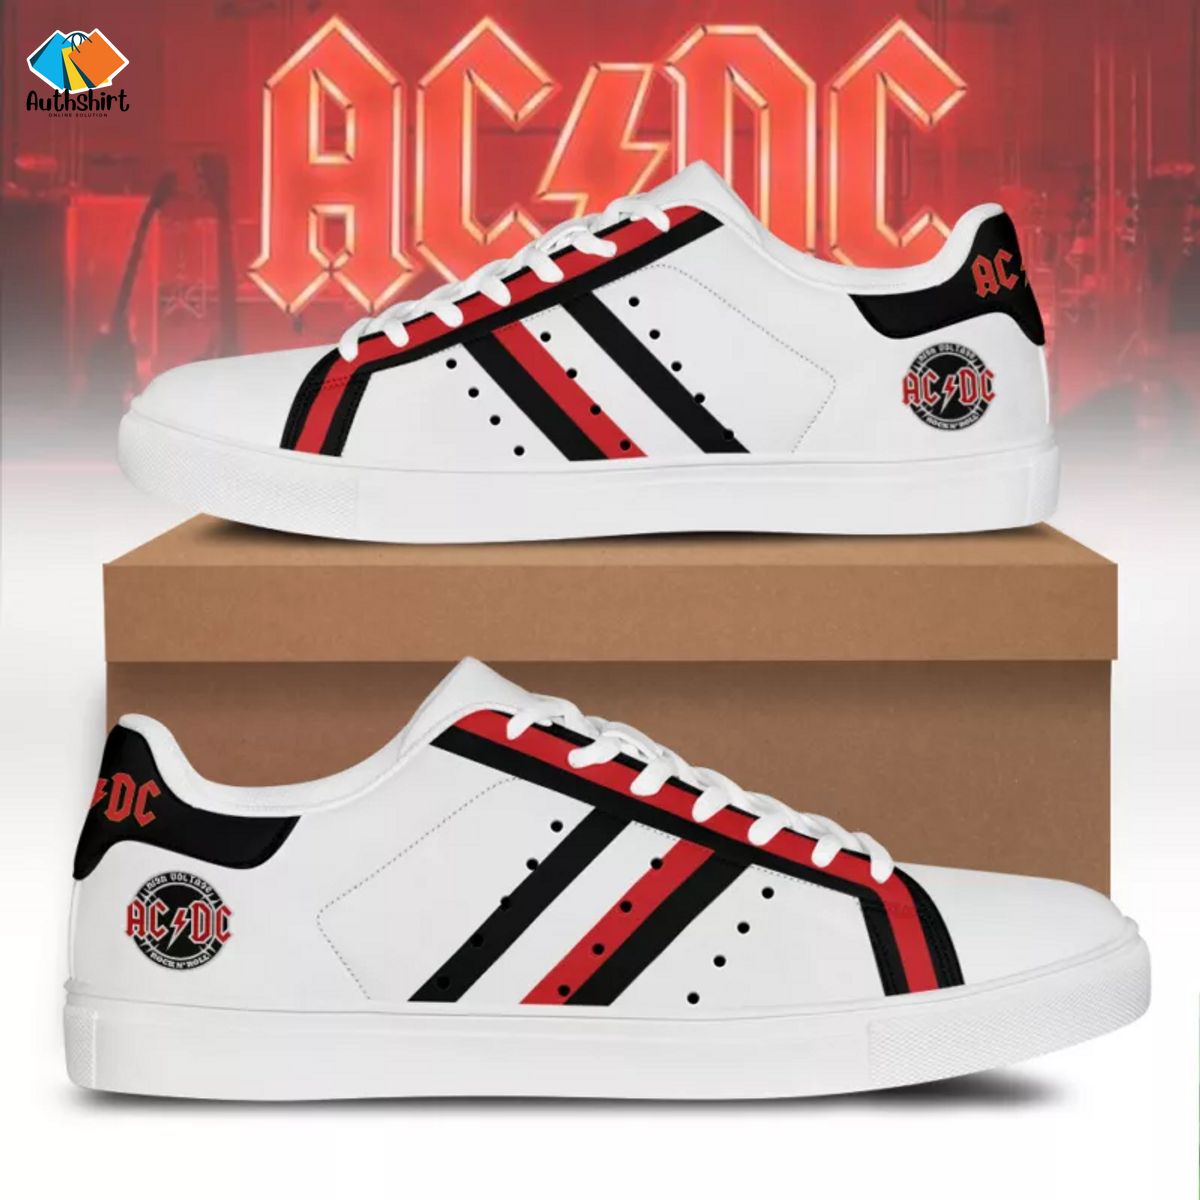 ACDC High Voltage Rock N’ RollStan Smith Shoes